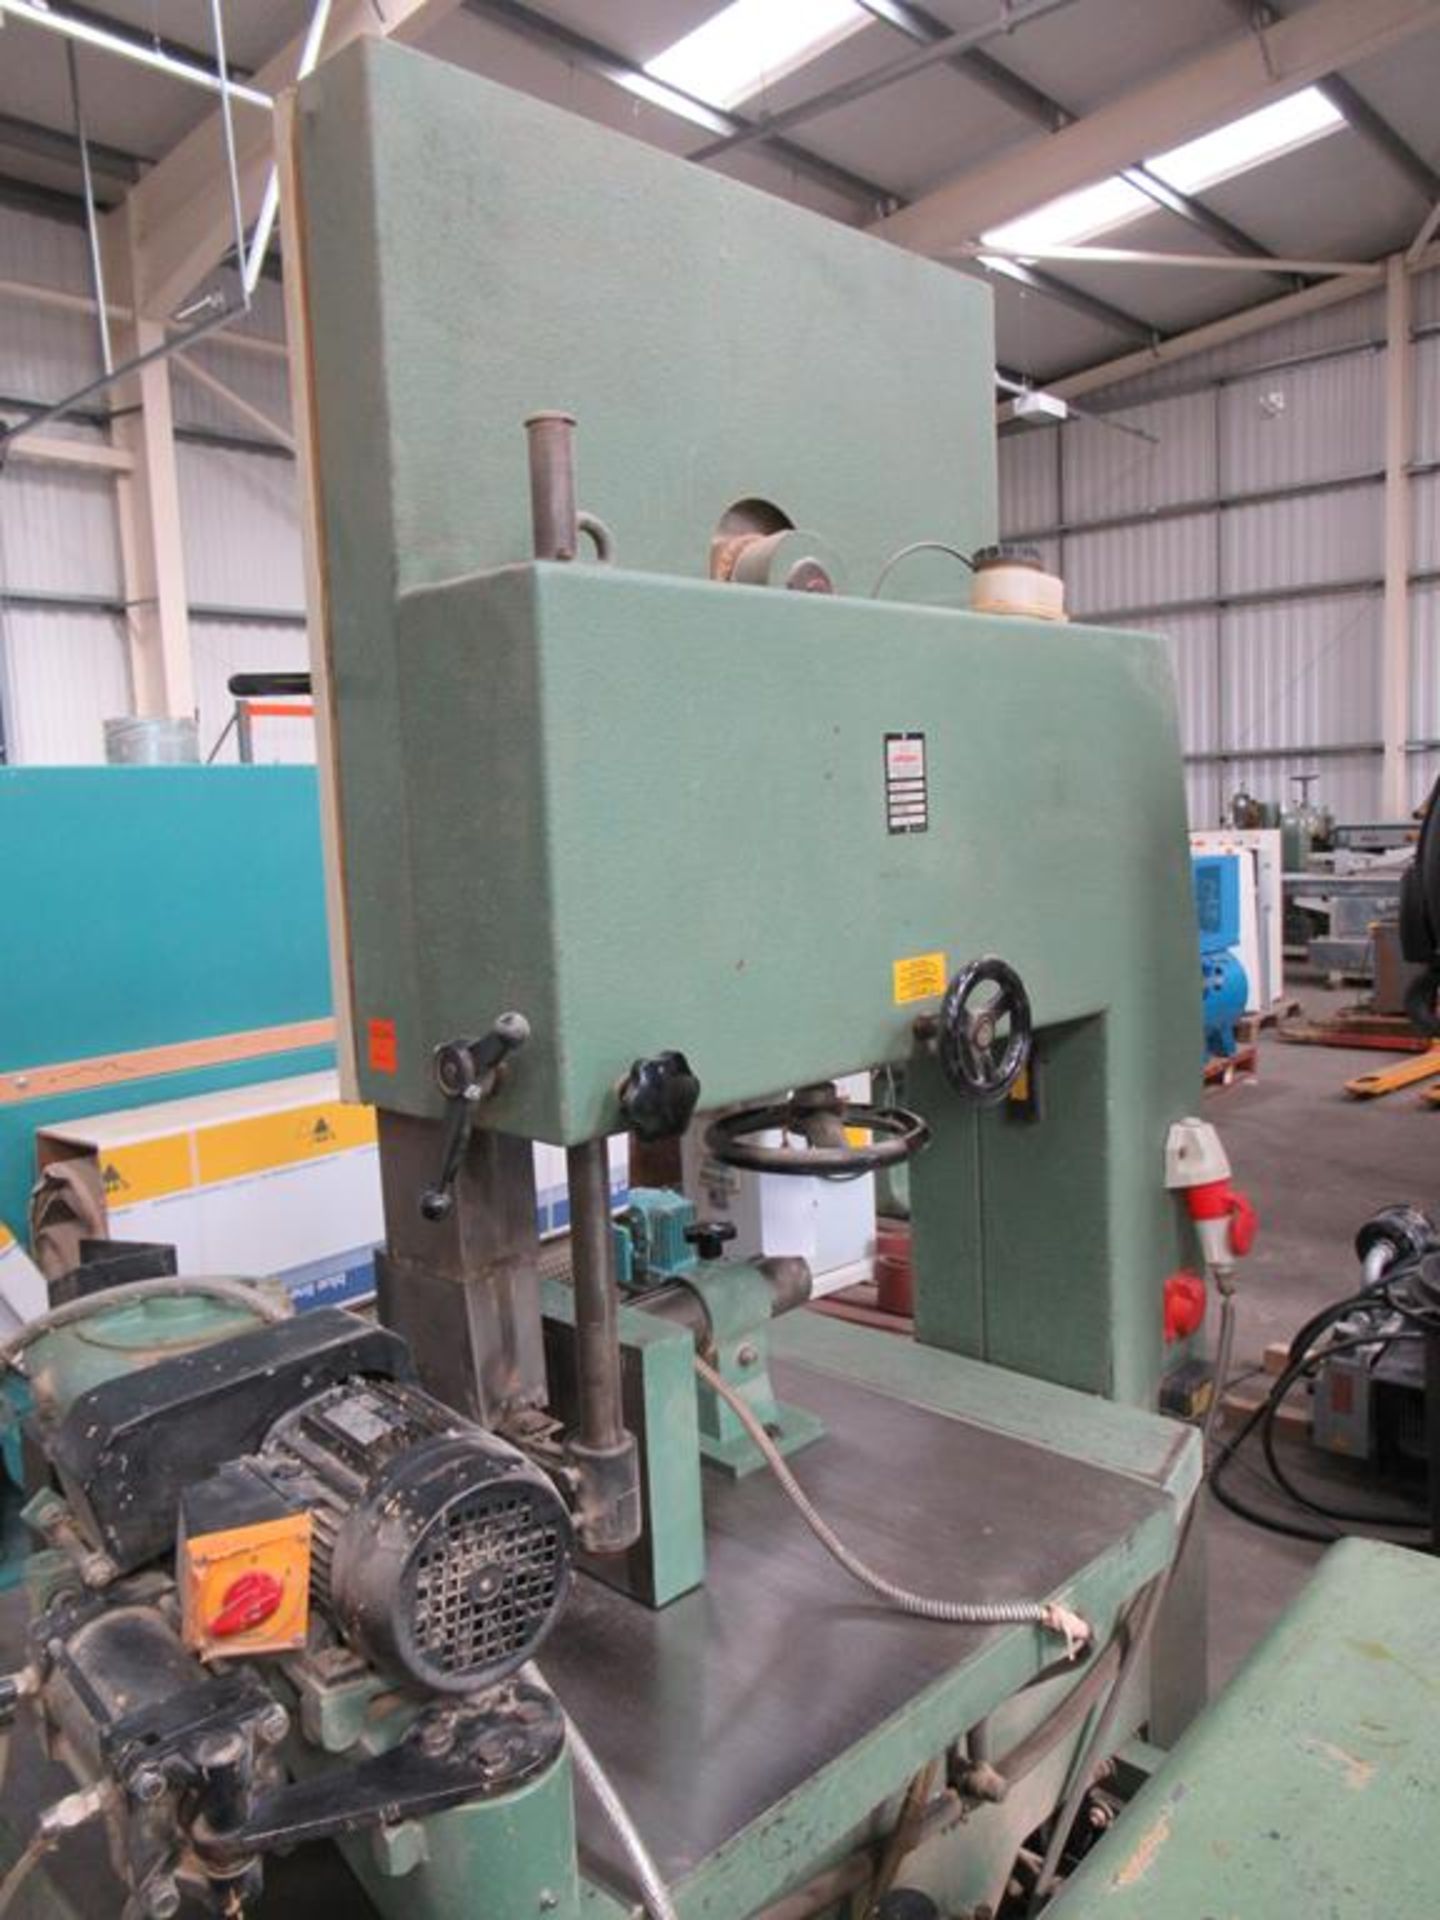 Centauro R 800 Industrial Bandsaw - Image 6 of 7